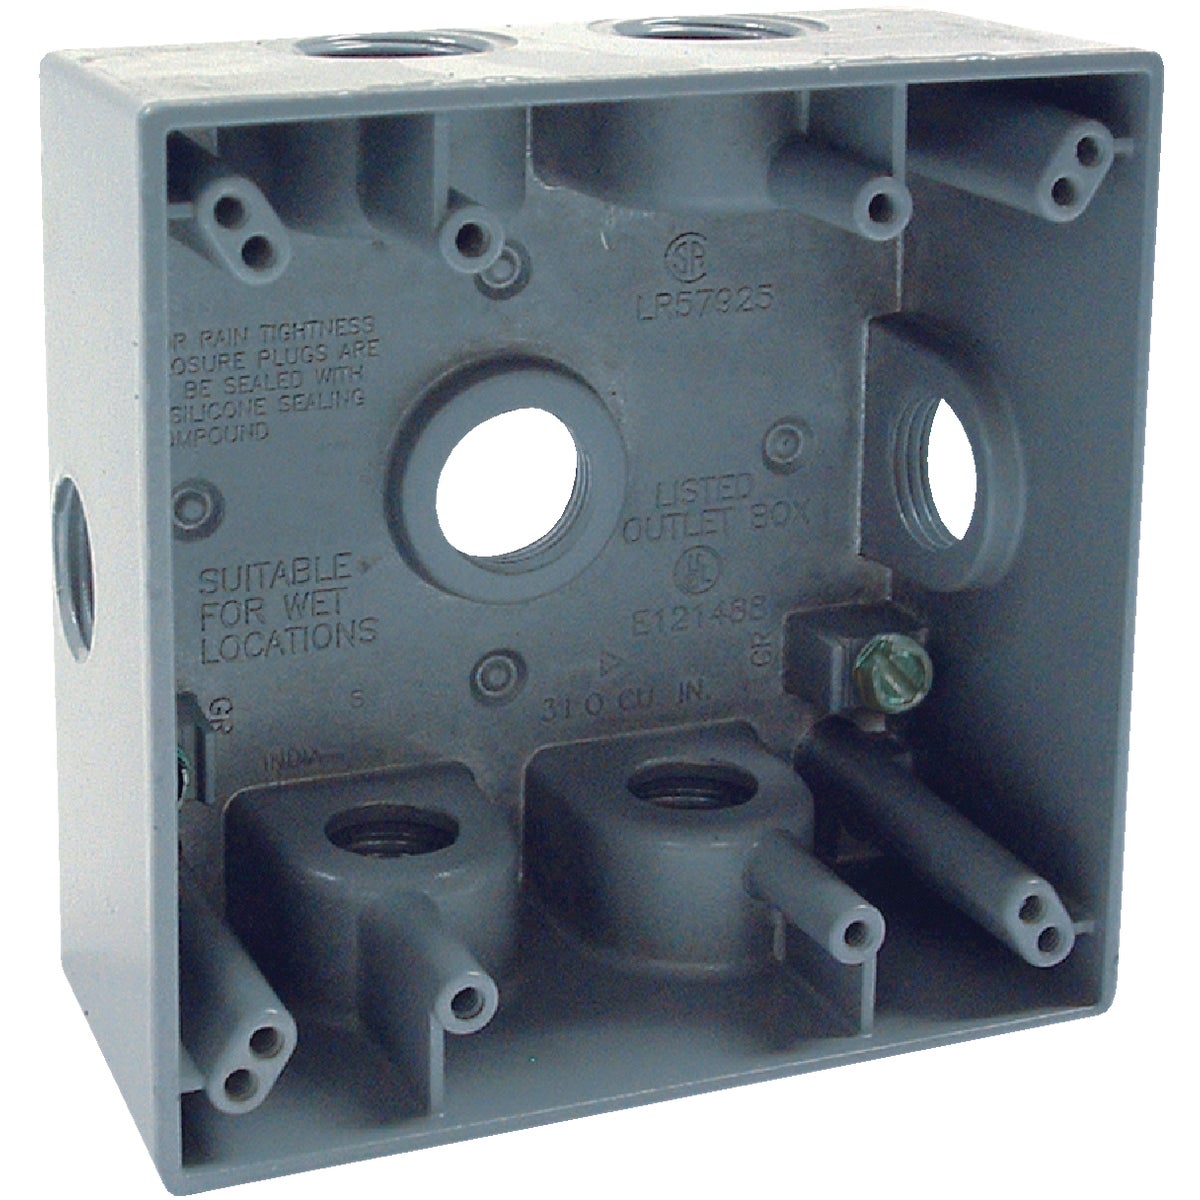 Item 502421, 2 gang box with lugs, 2 inches deep with 7 outlets, 1/2-inch NPT (National 